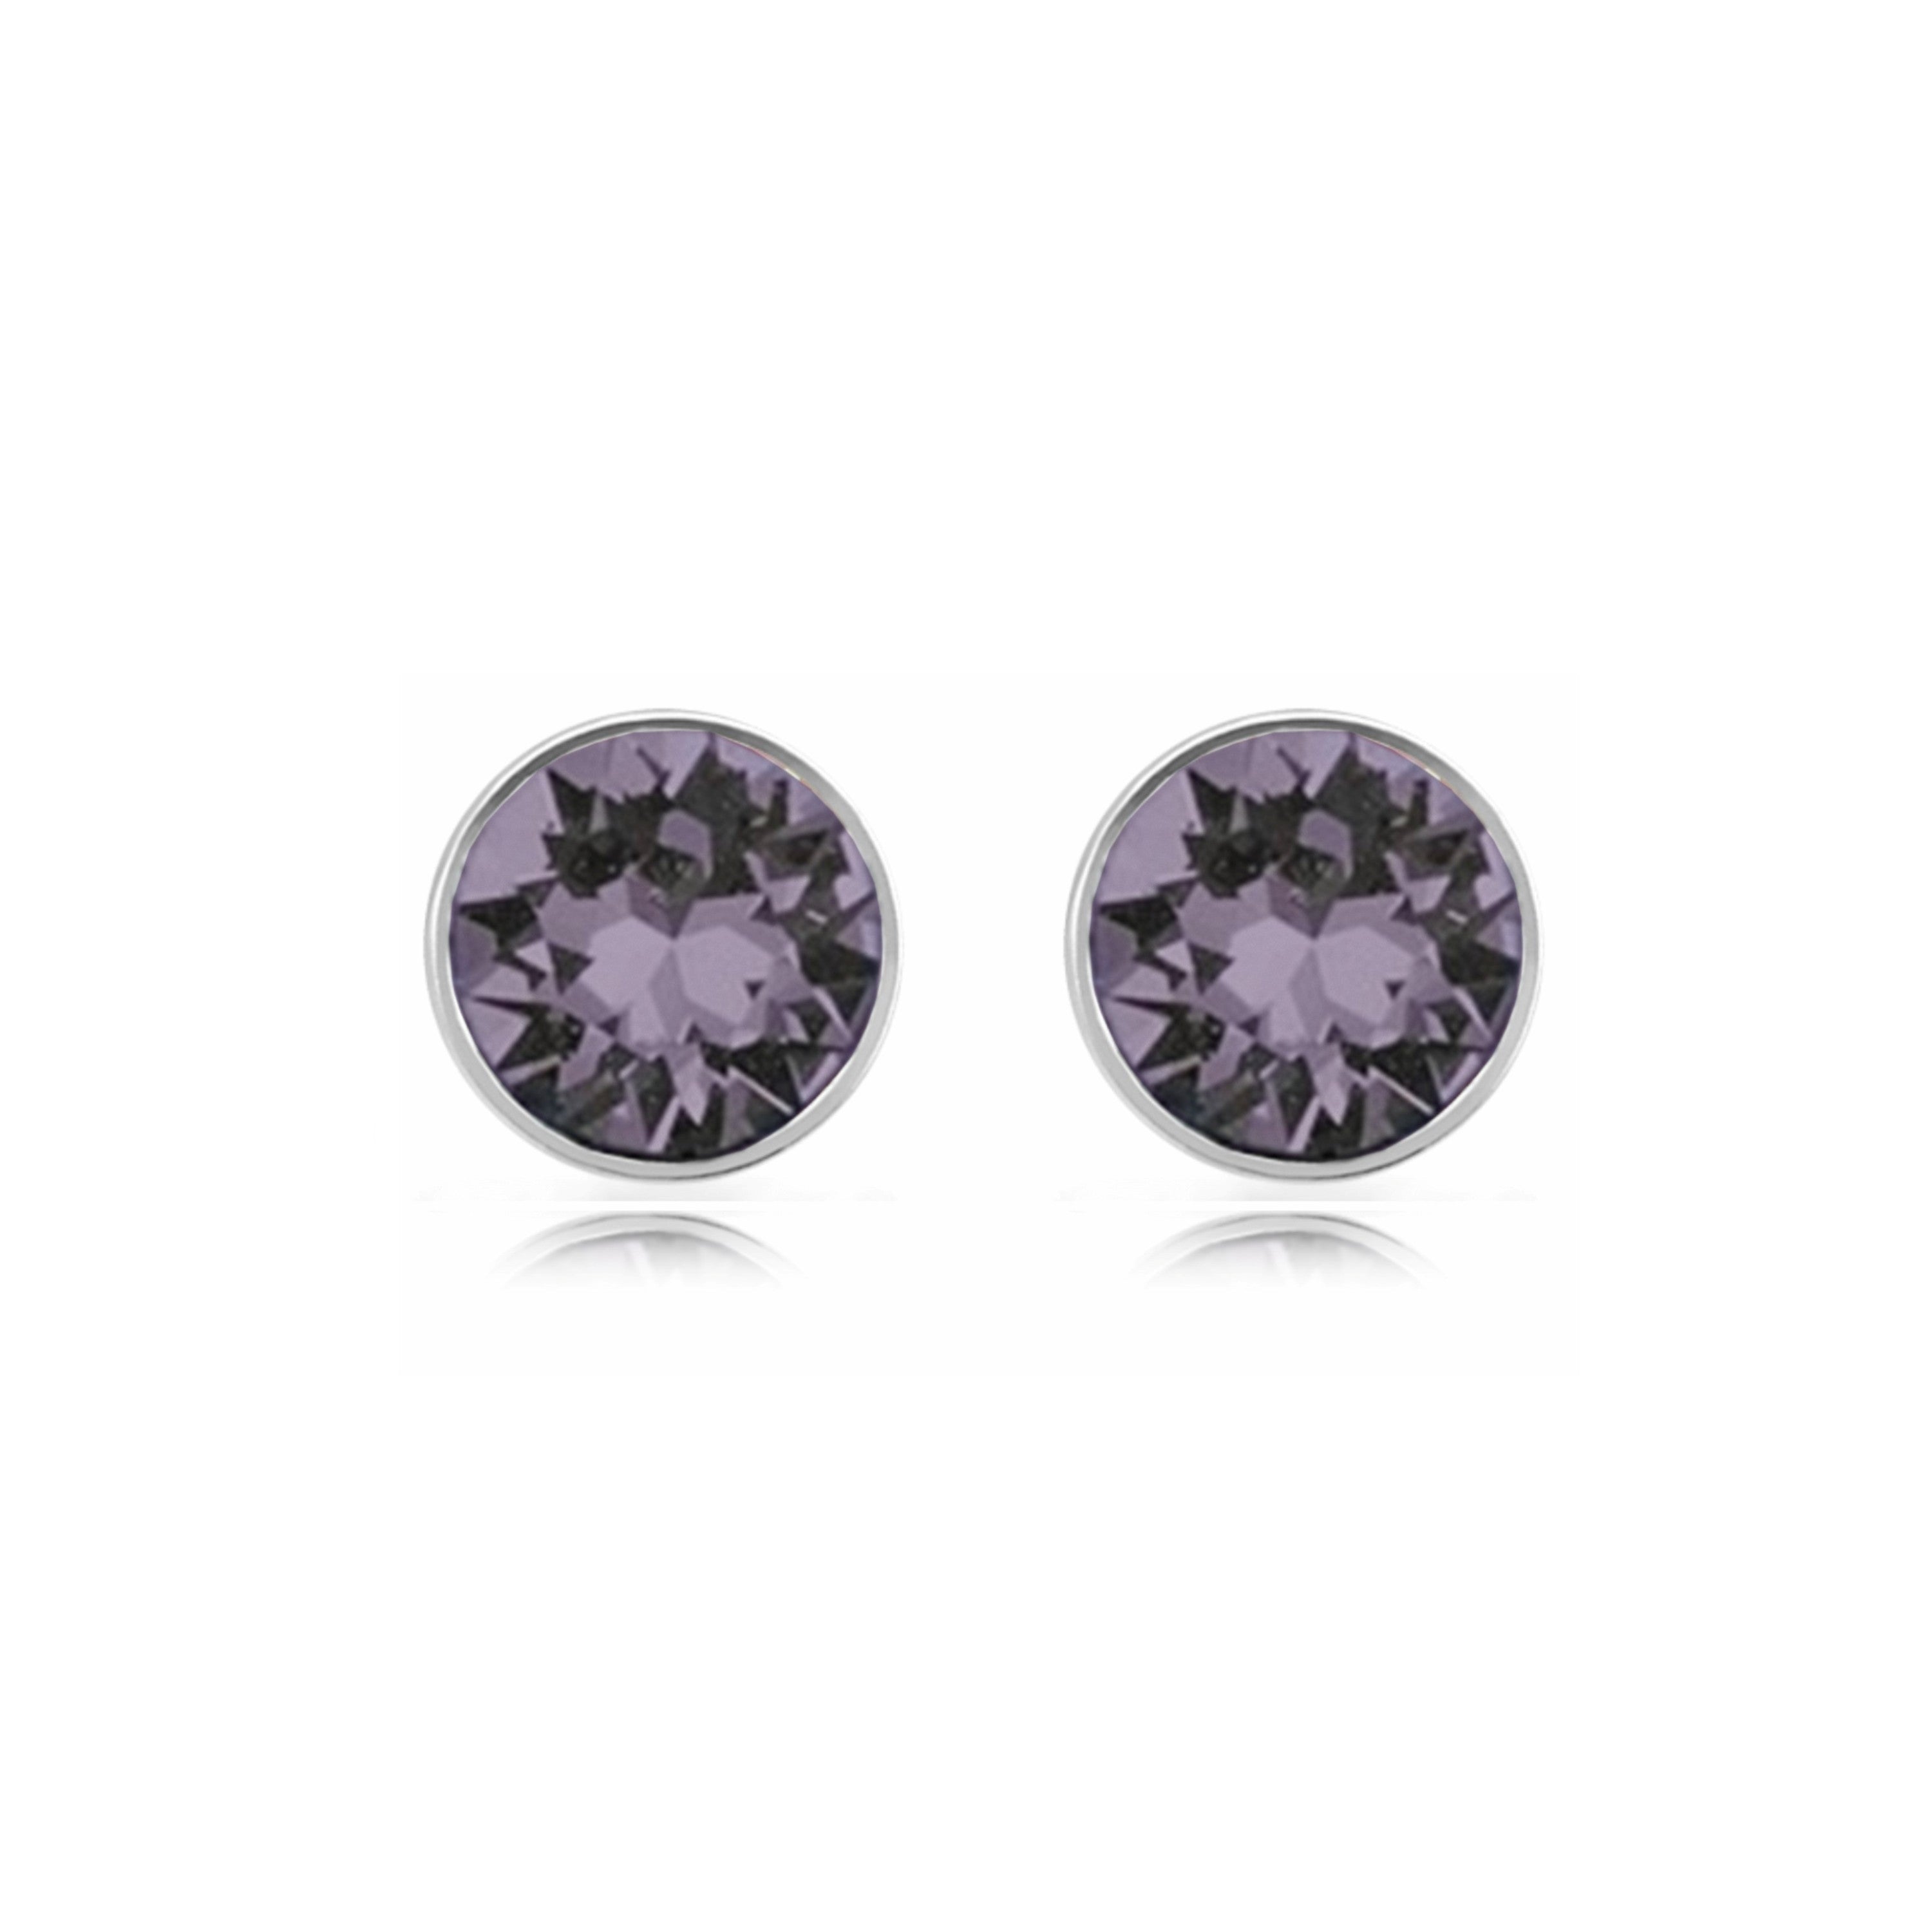 Sterling Silver 5mm Amethyst Stud Earring  with Crystals from Swarovski®